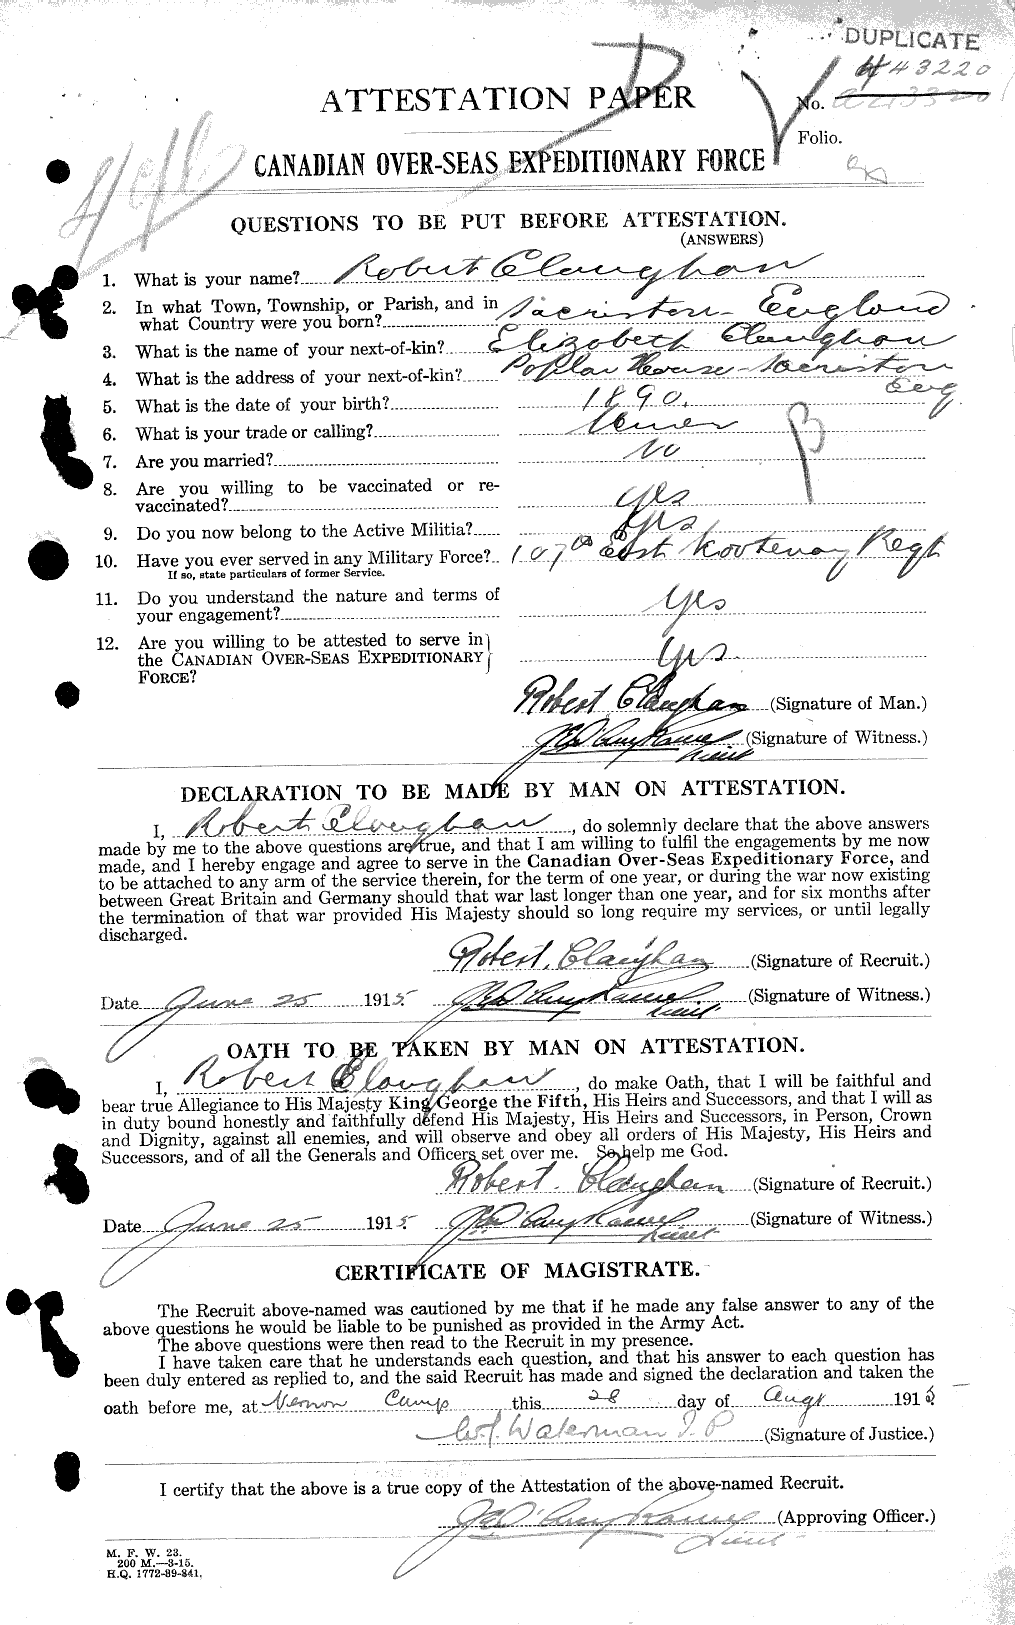 Personnel Records of the First World War - CEF 019043a